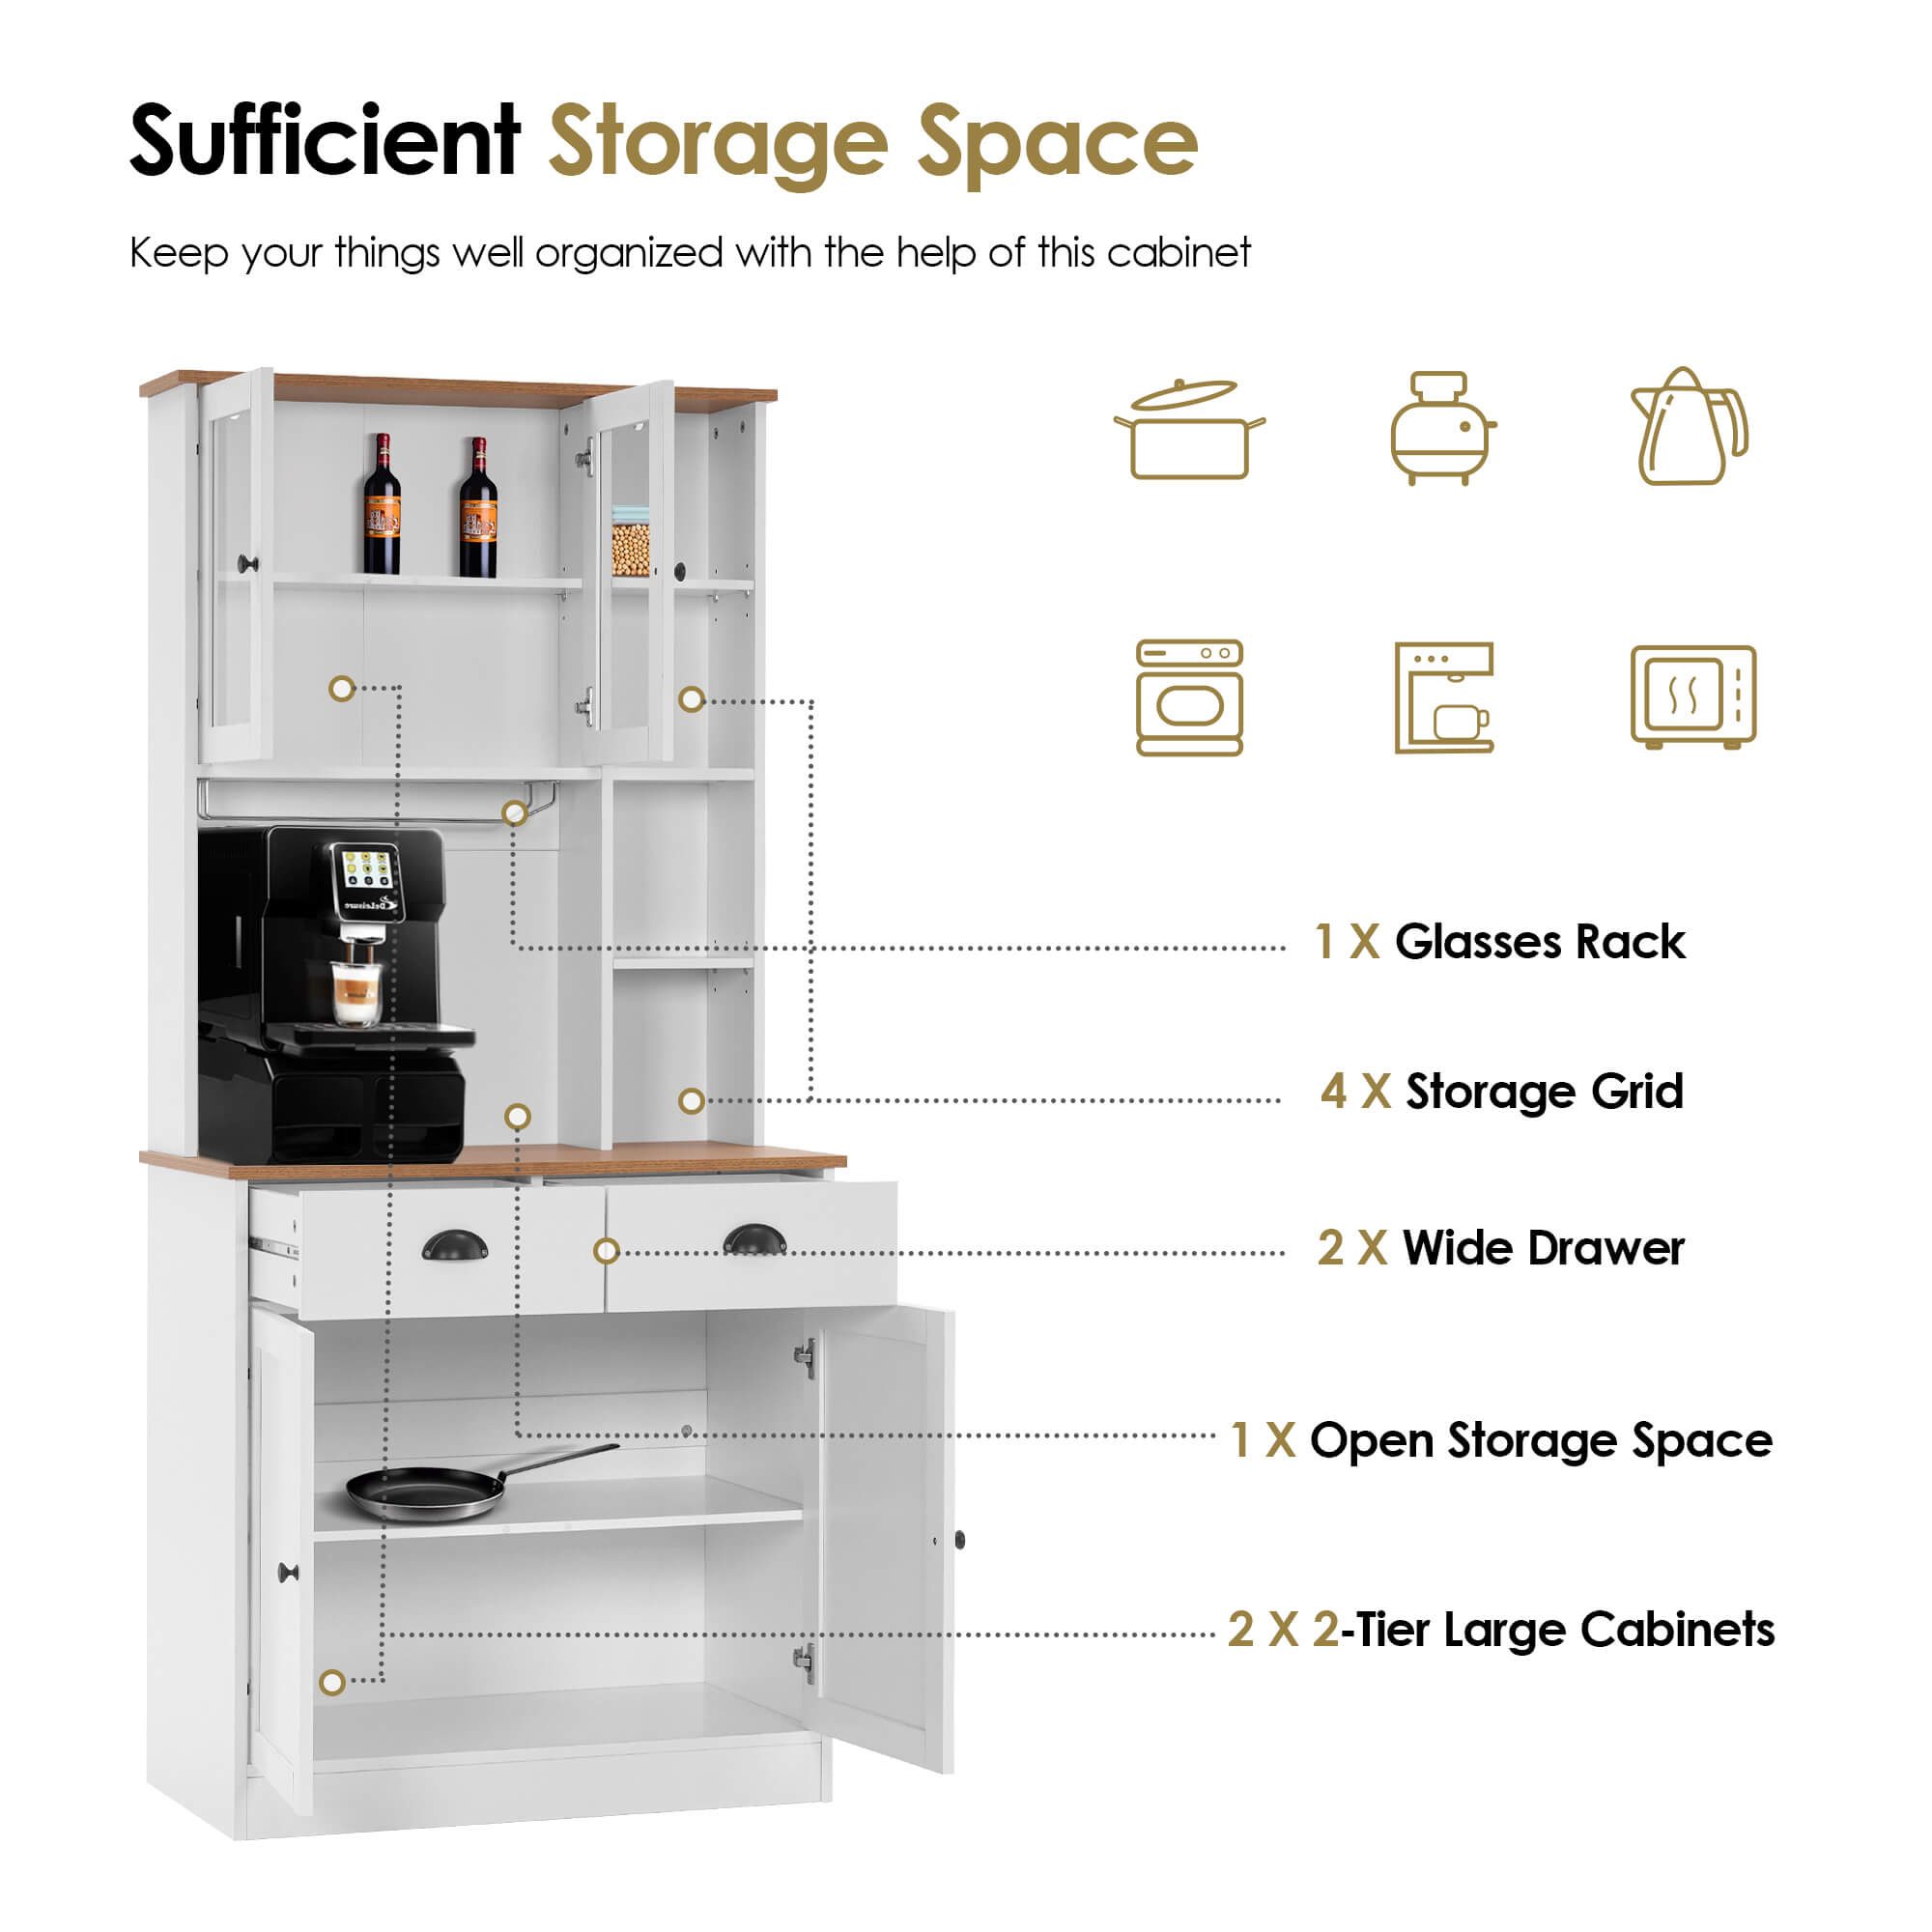 ivinta Pantry Storage Kitchen Cabinet, Tall Hutch Cabinet with Doors and Shelves